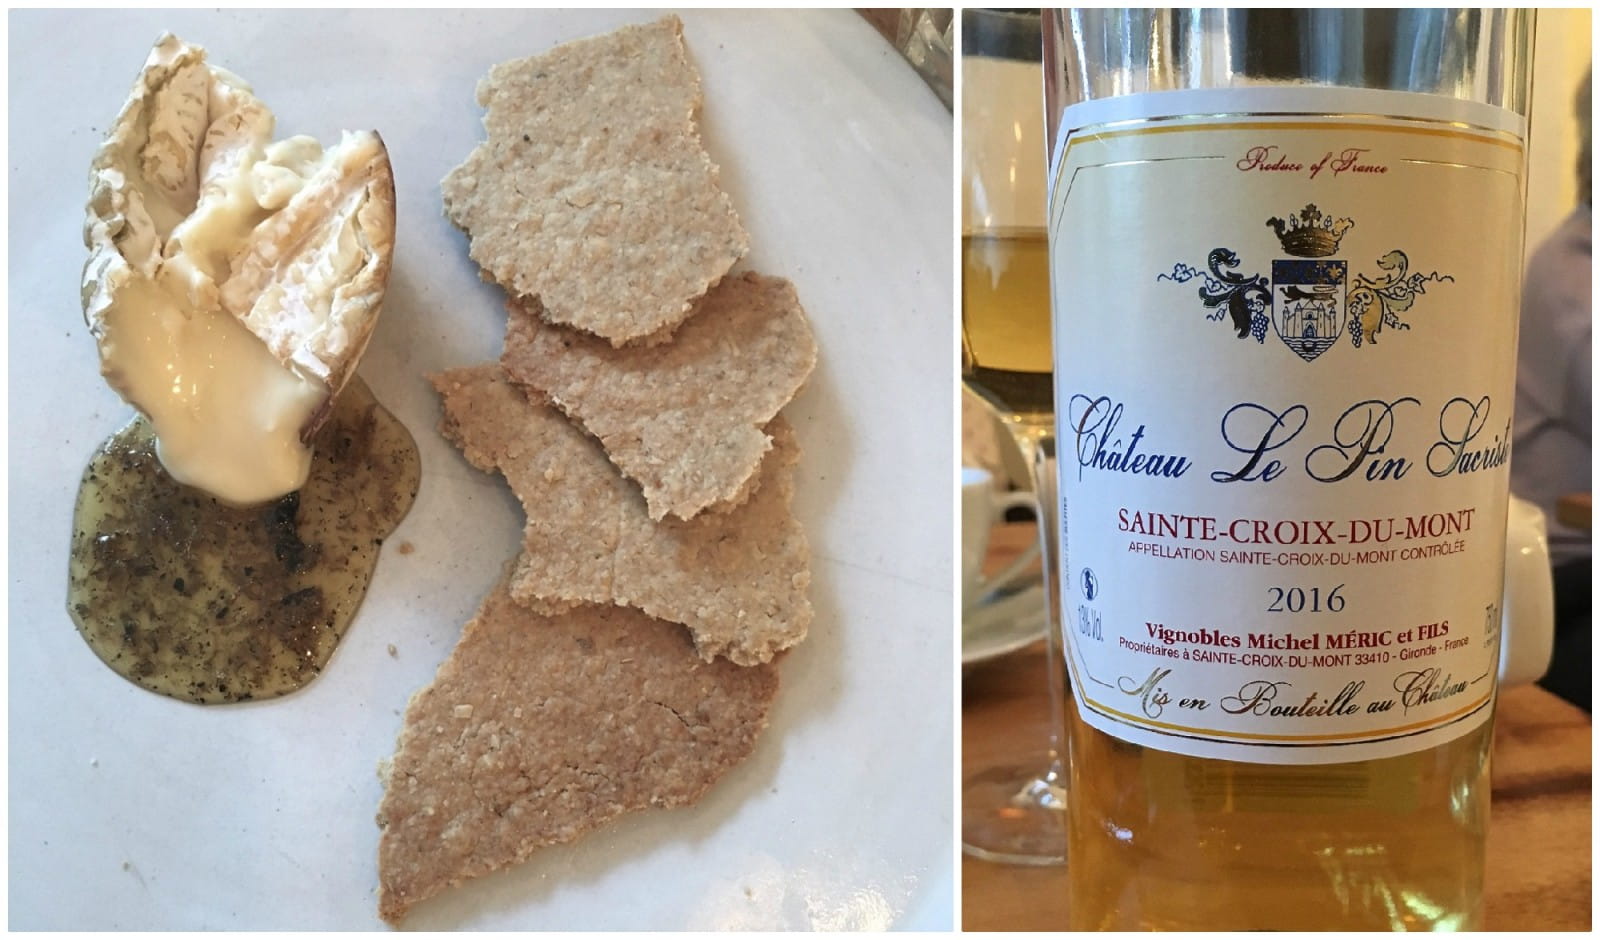 Alcester Gold cheese and truffle honey and Sainte-Croix-du-Mont